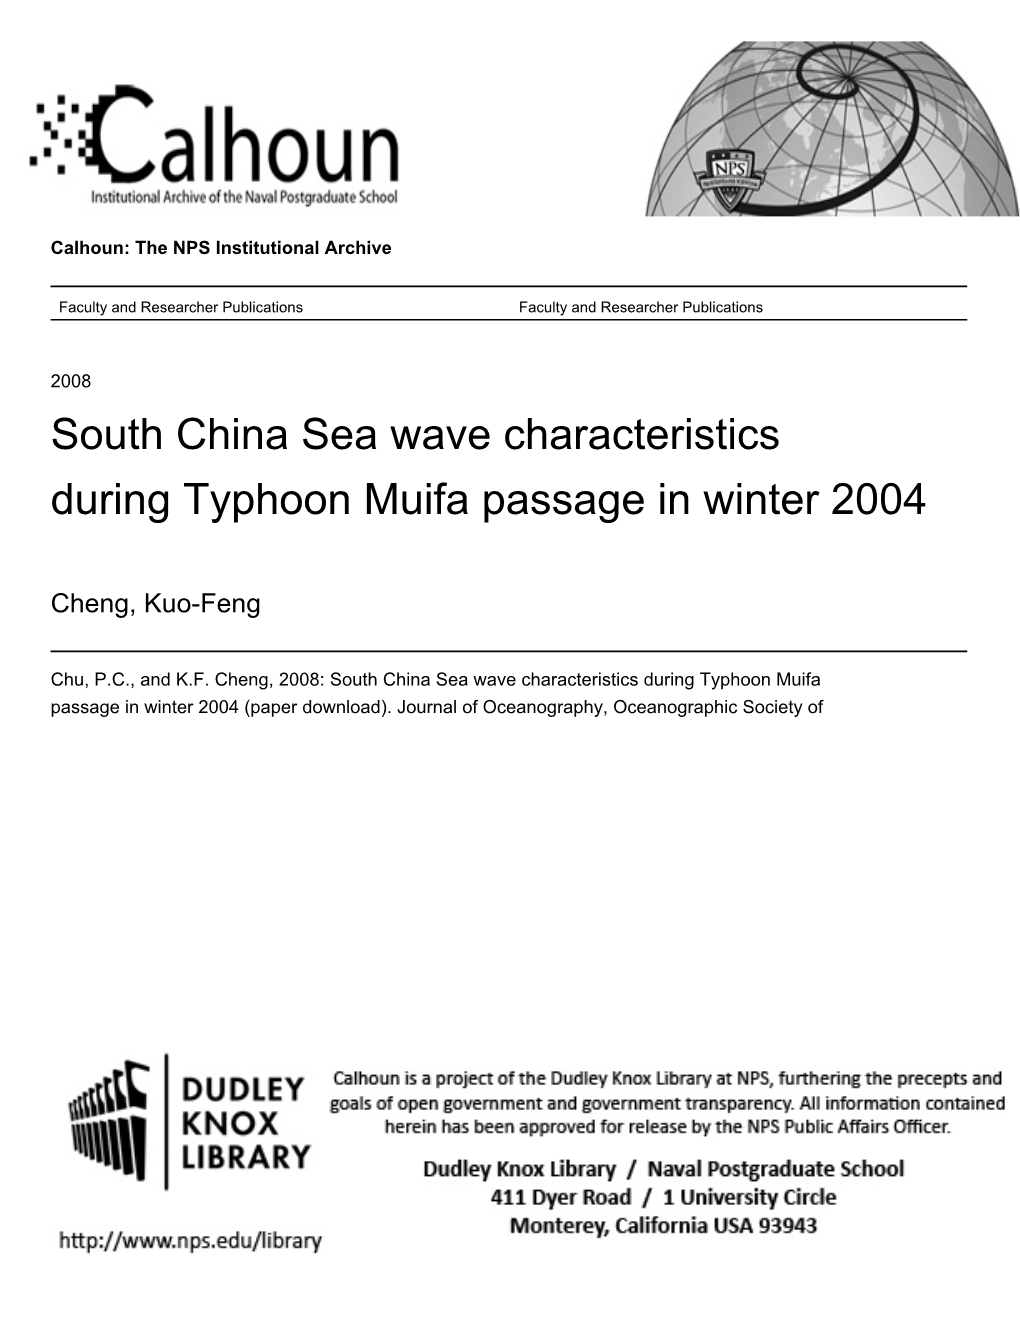 South China Sea Wave Characteristics During Typhoon Muifa Passage in Winter 2004